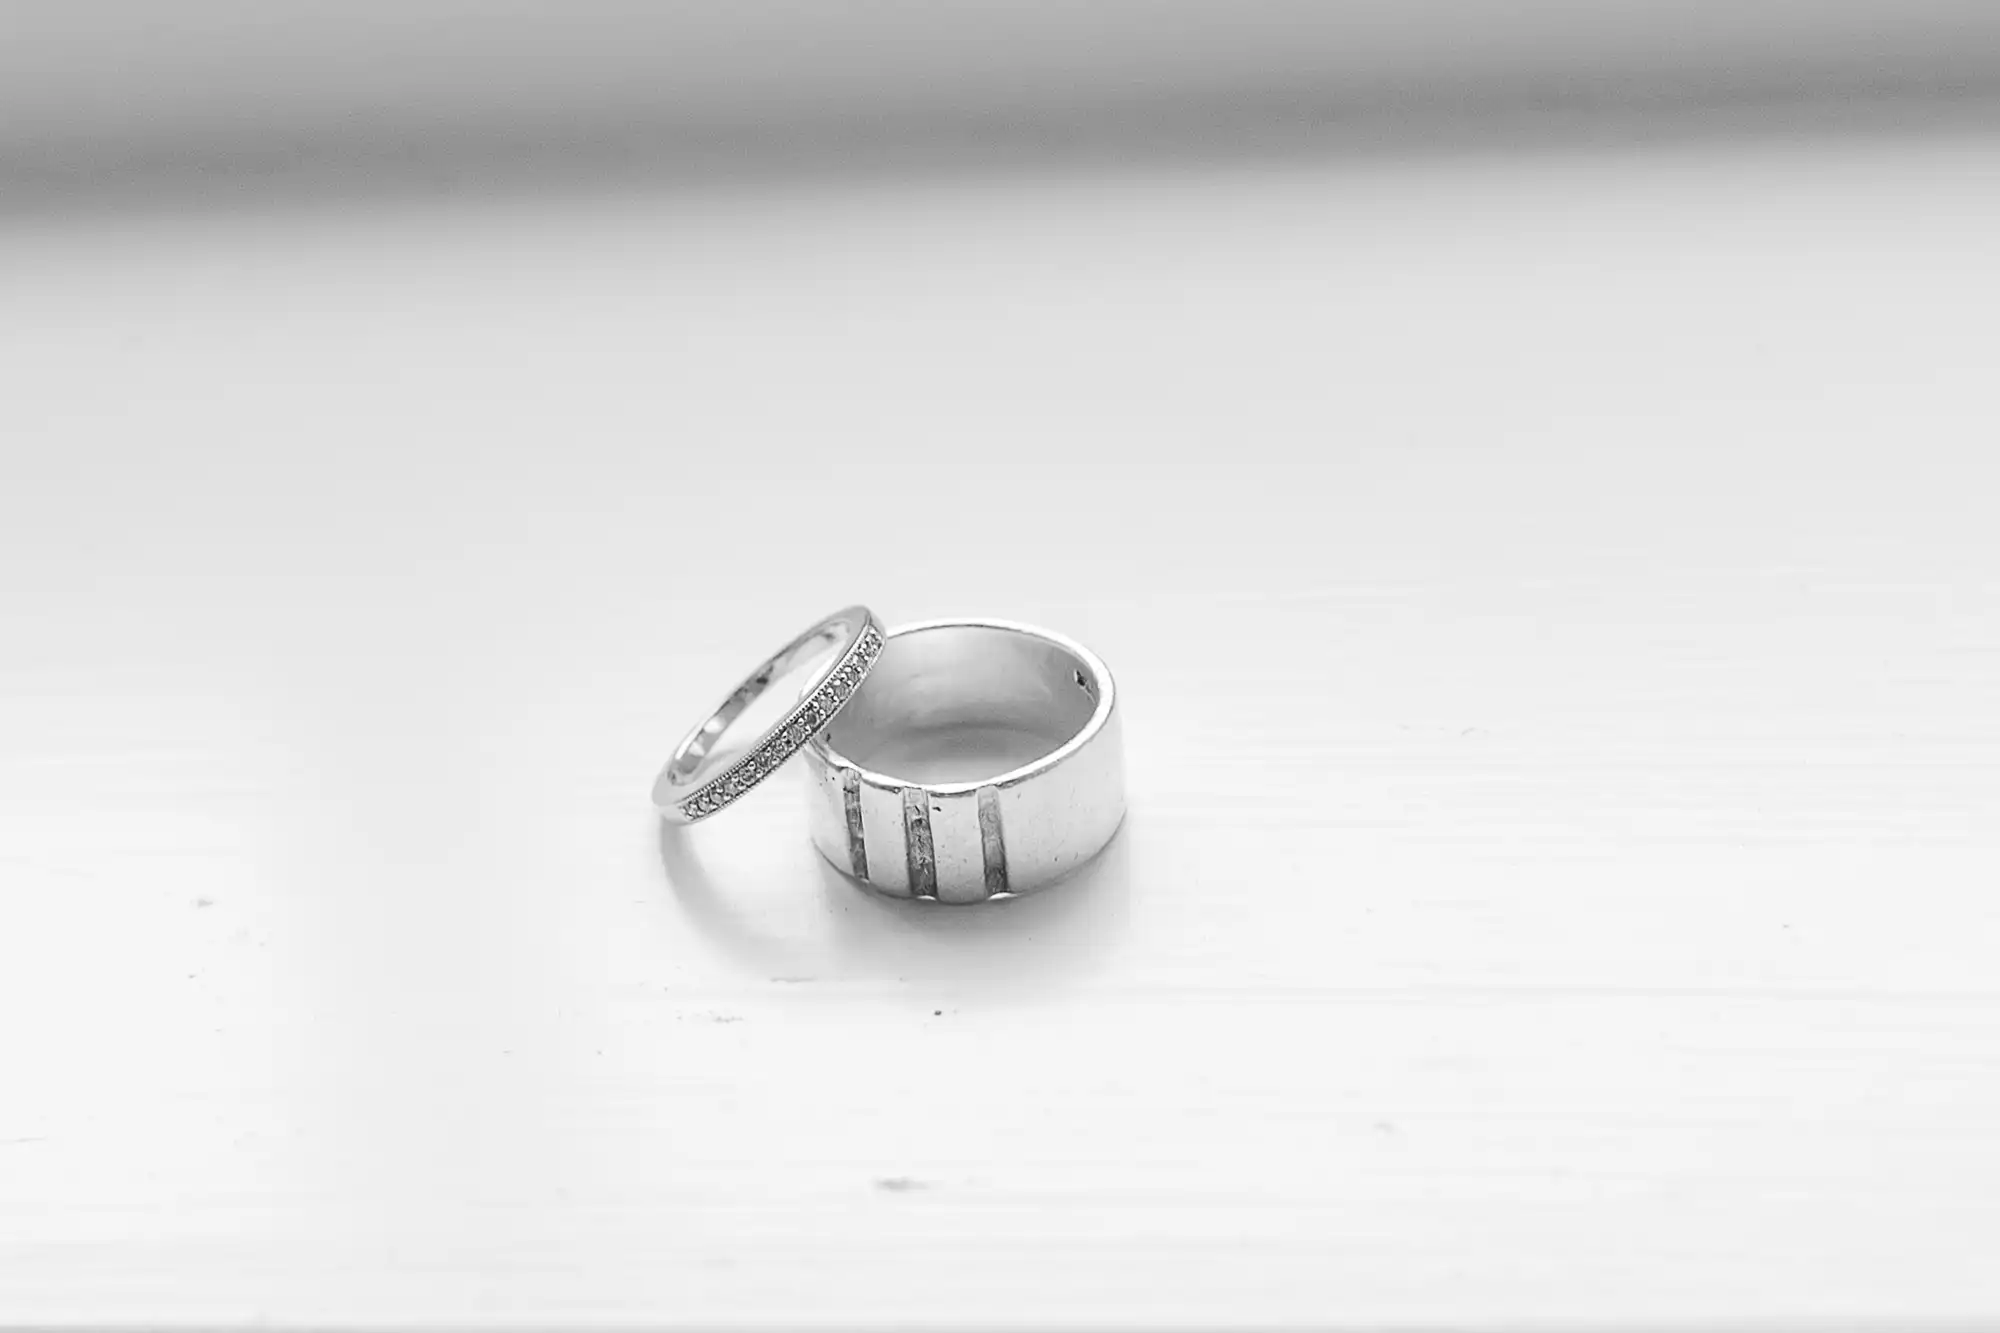 Two rings on a plain surface, one slender with small embedded stones and the other wider with groove details, presented in a monochrome setting.